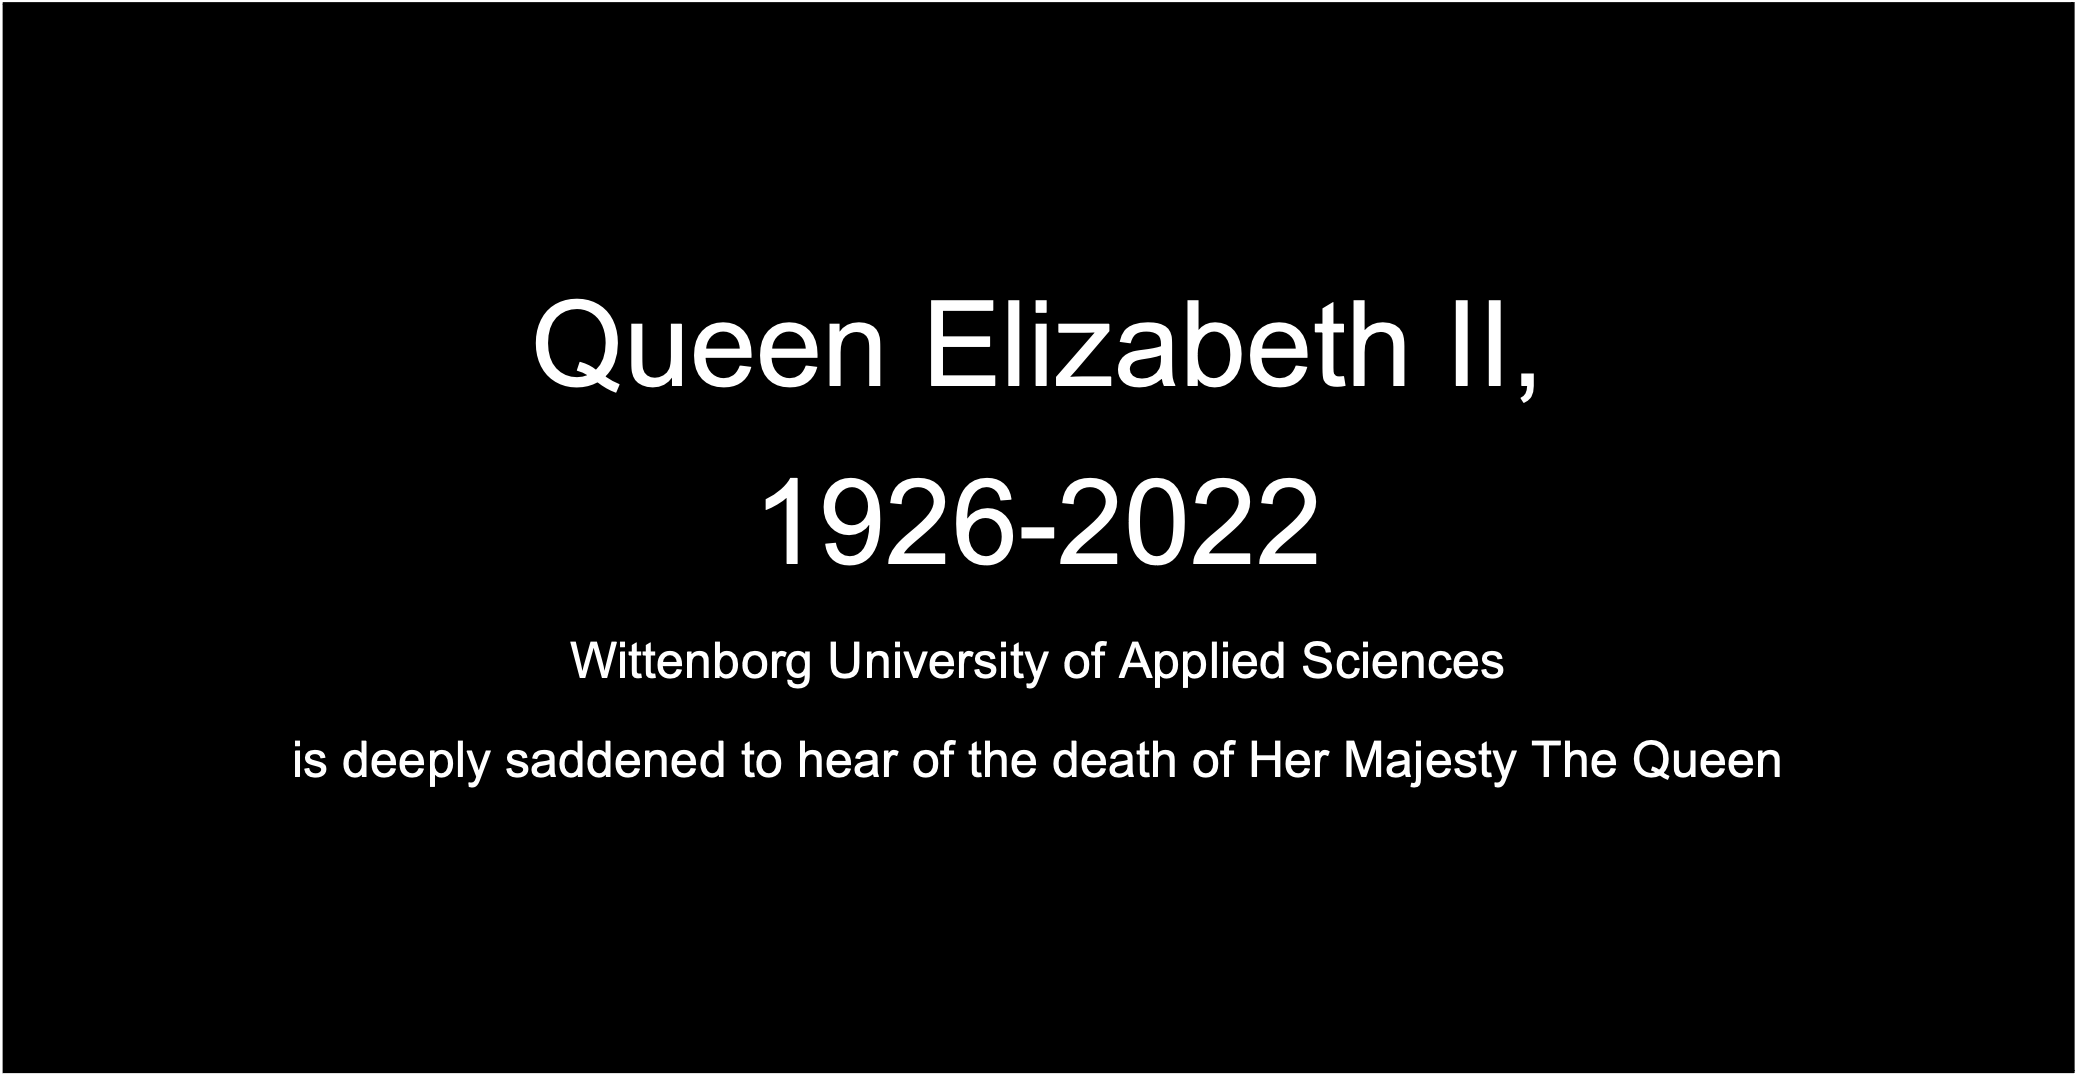 Wittenborg University of Applied Sciences is deeply saddened to hear of the death of Her Majesty The Queen